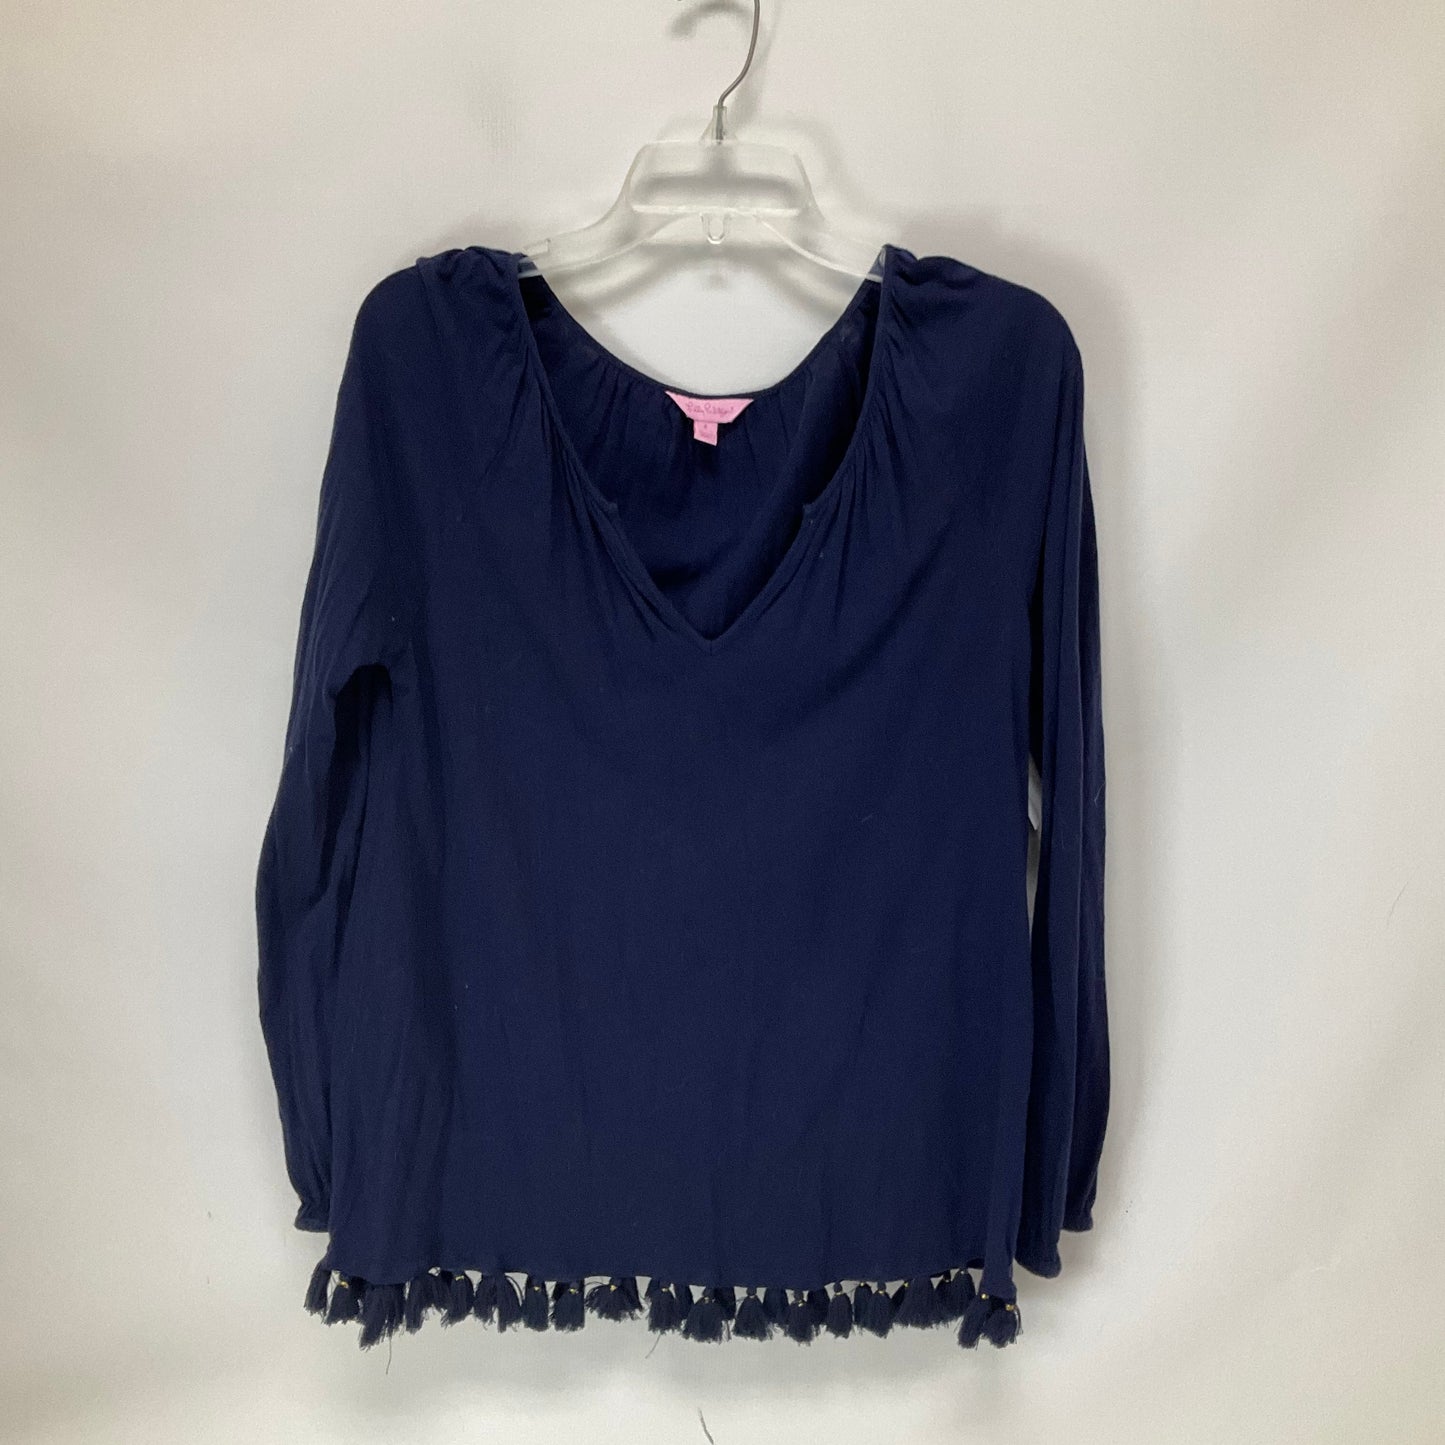 Navy Top Long Sleeve Lilly Pulitzer, Size S